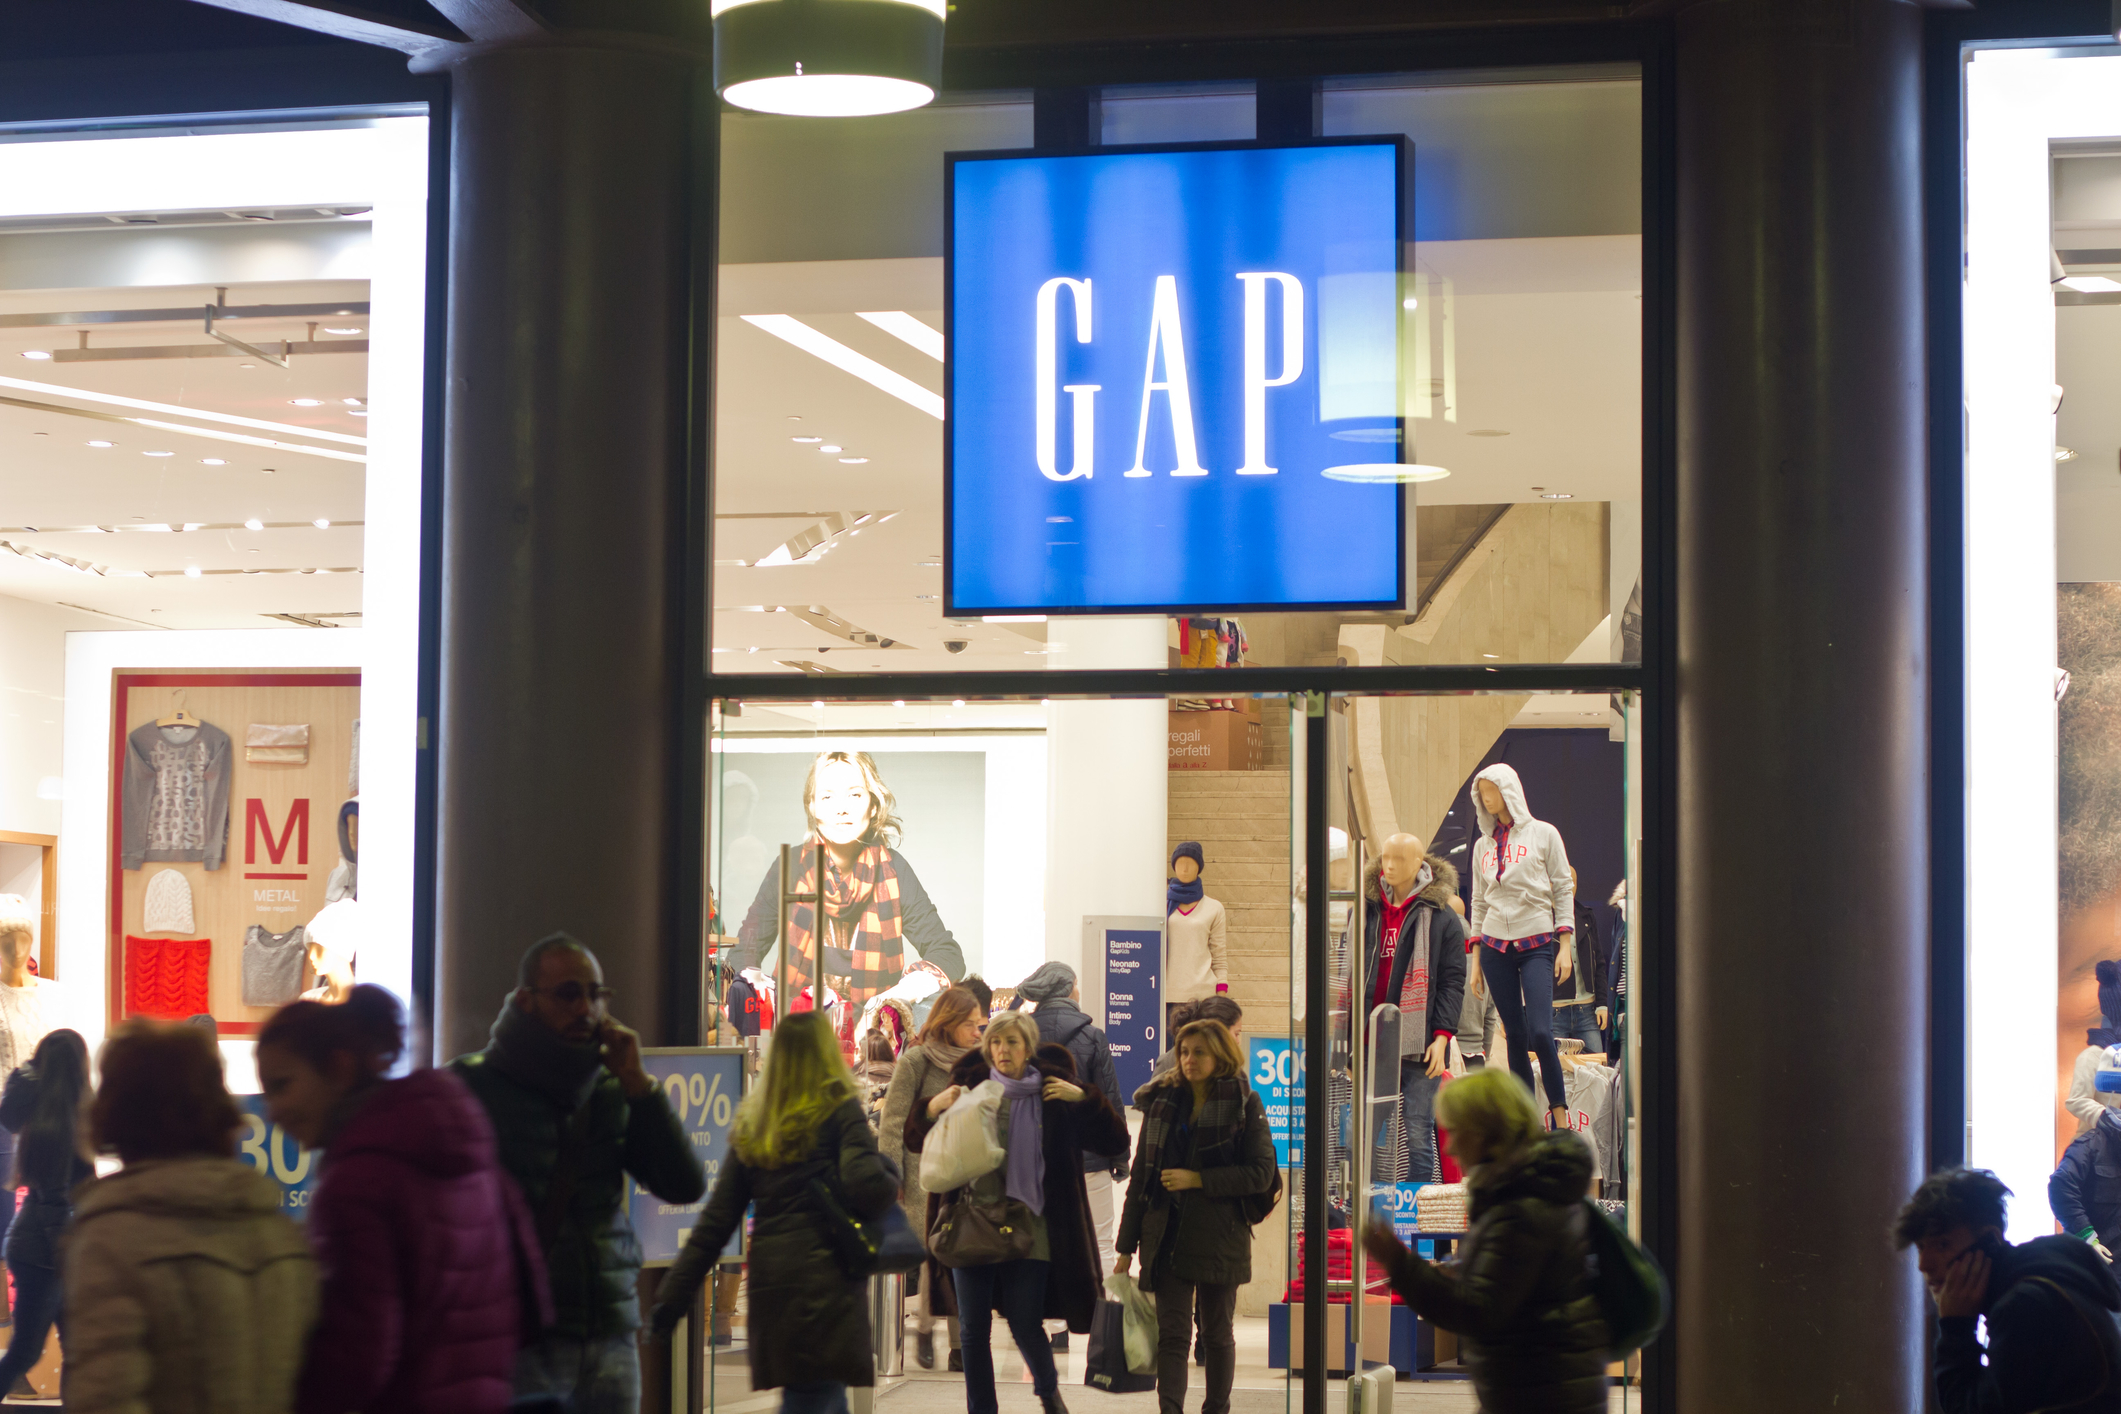 Today only: Save 40% at Gap, Banana Republic and Old Navy online